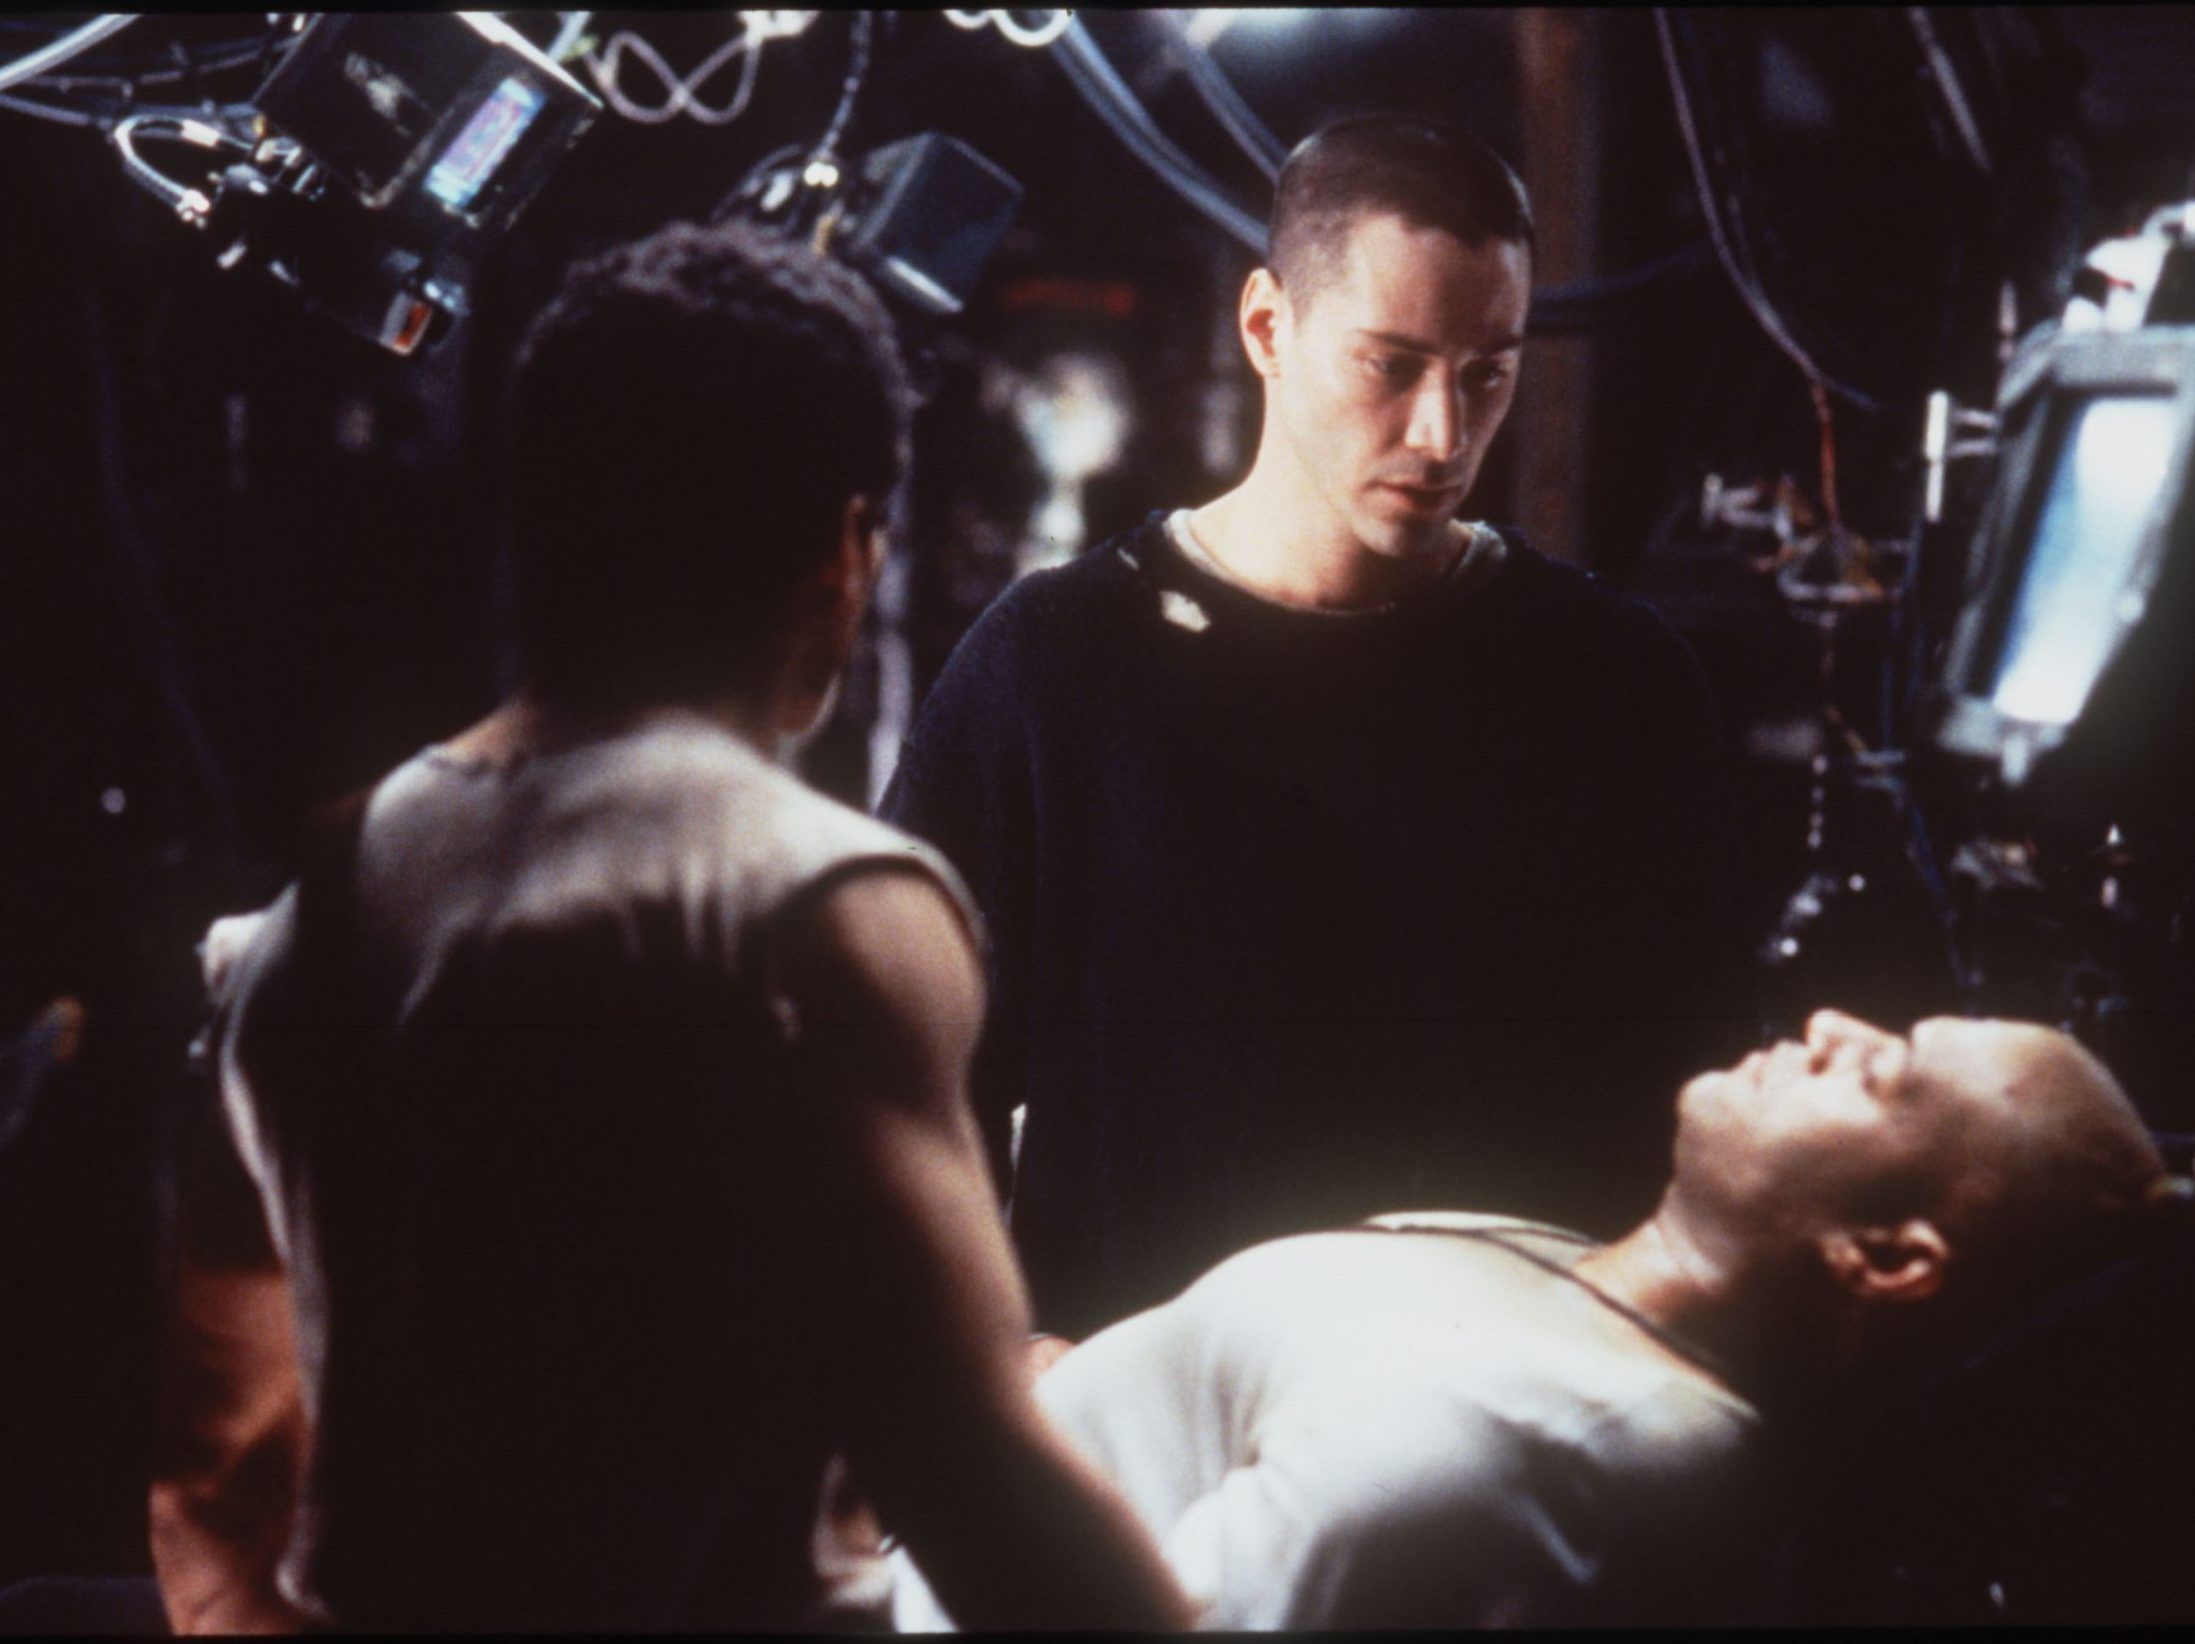 The Wachowskis working on Matrix 4?  Hollywood News - The Indian Express